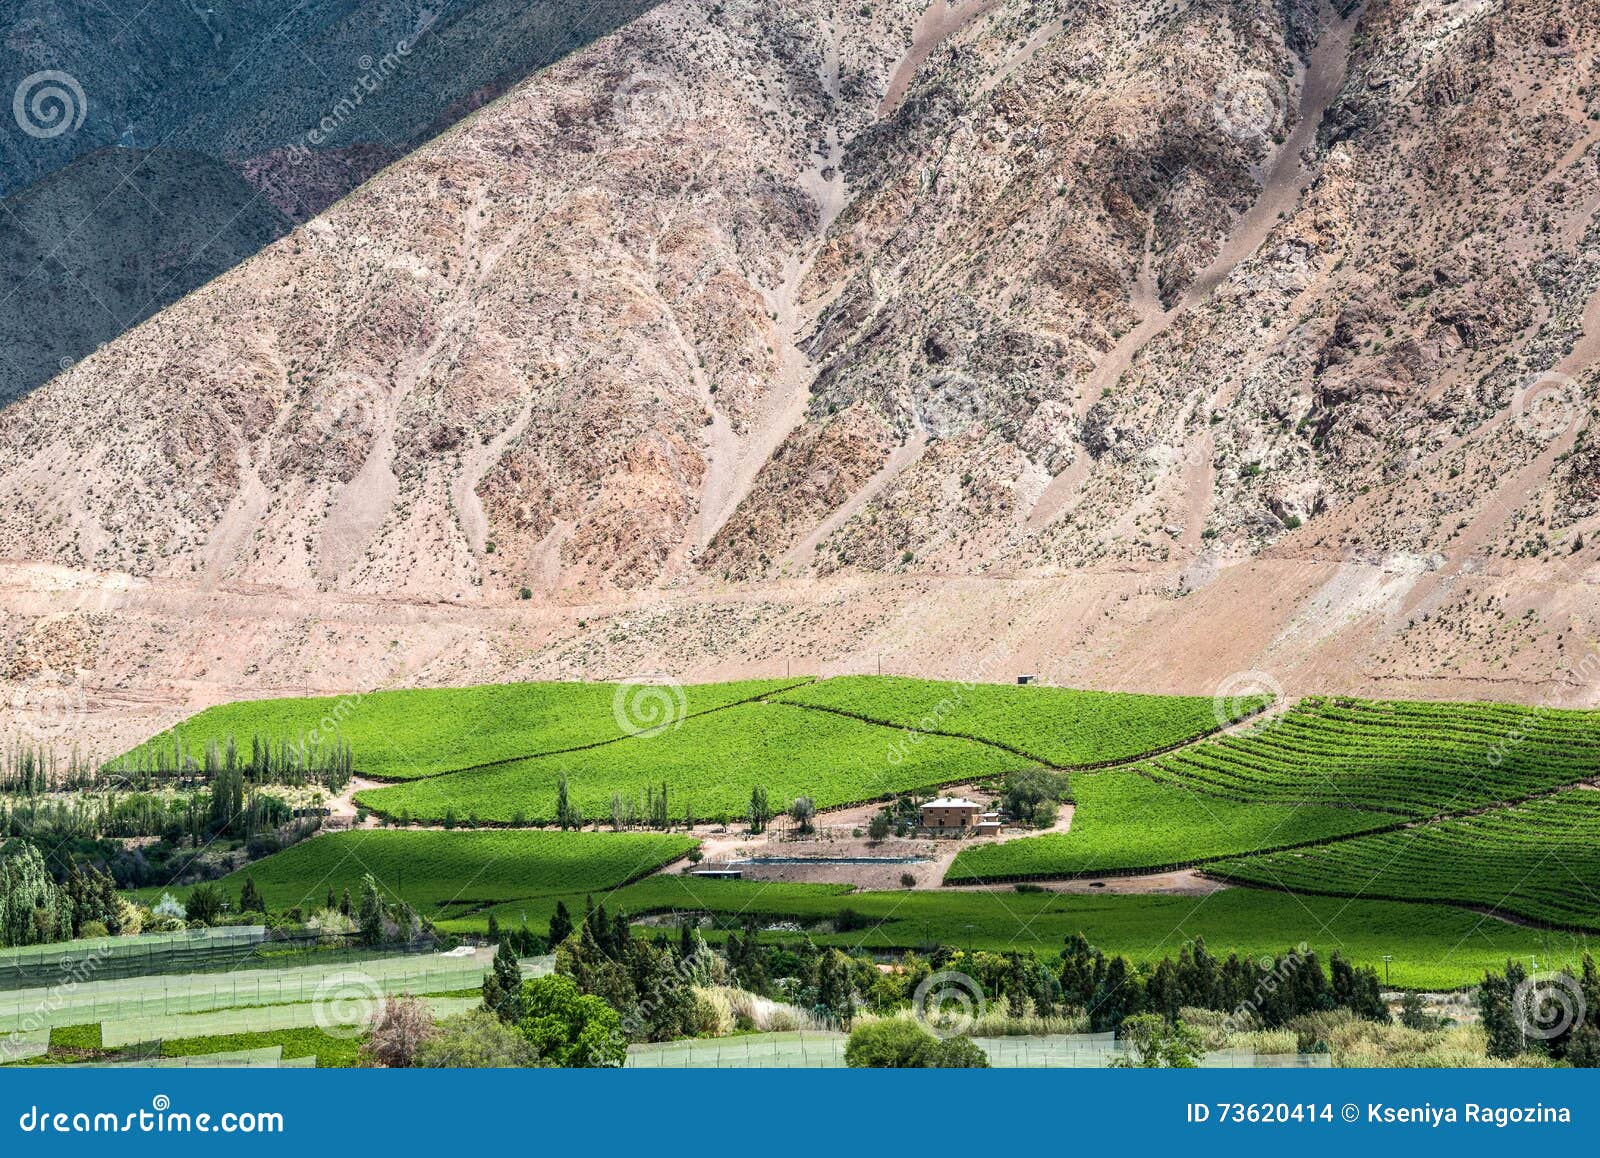 vineyards of elqui valley, andes, chile